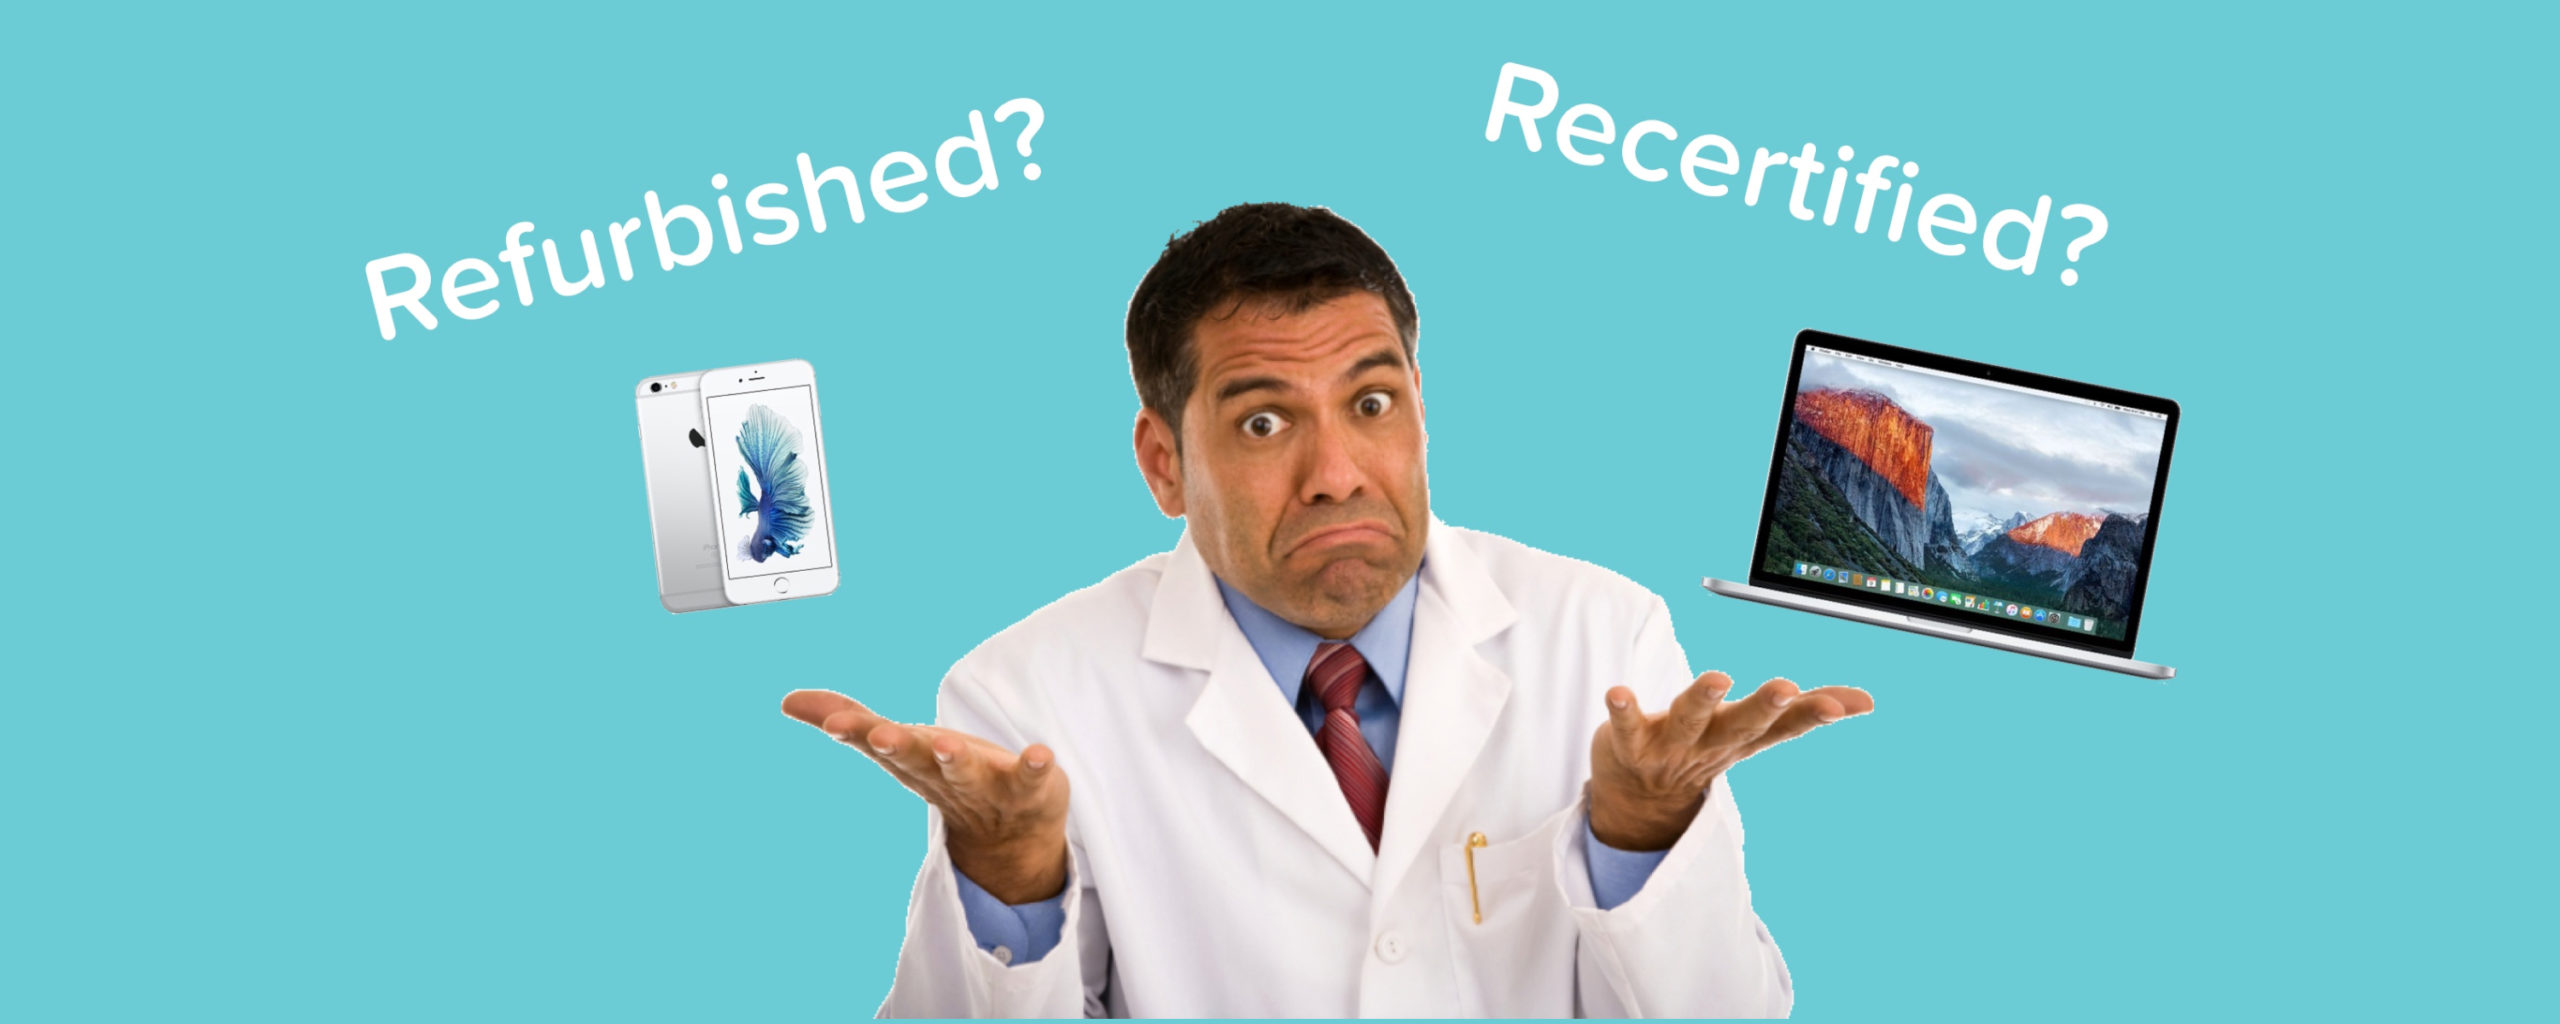 Refurbished vs. Recertified: The Difference